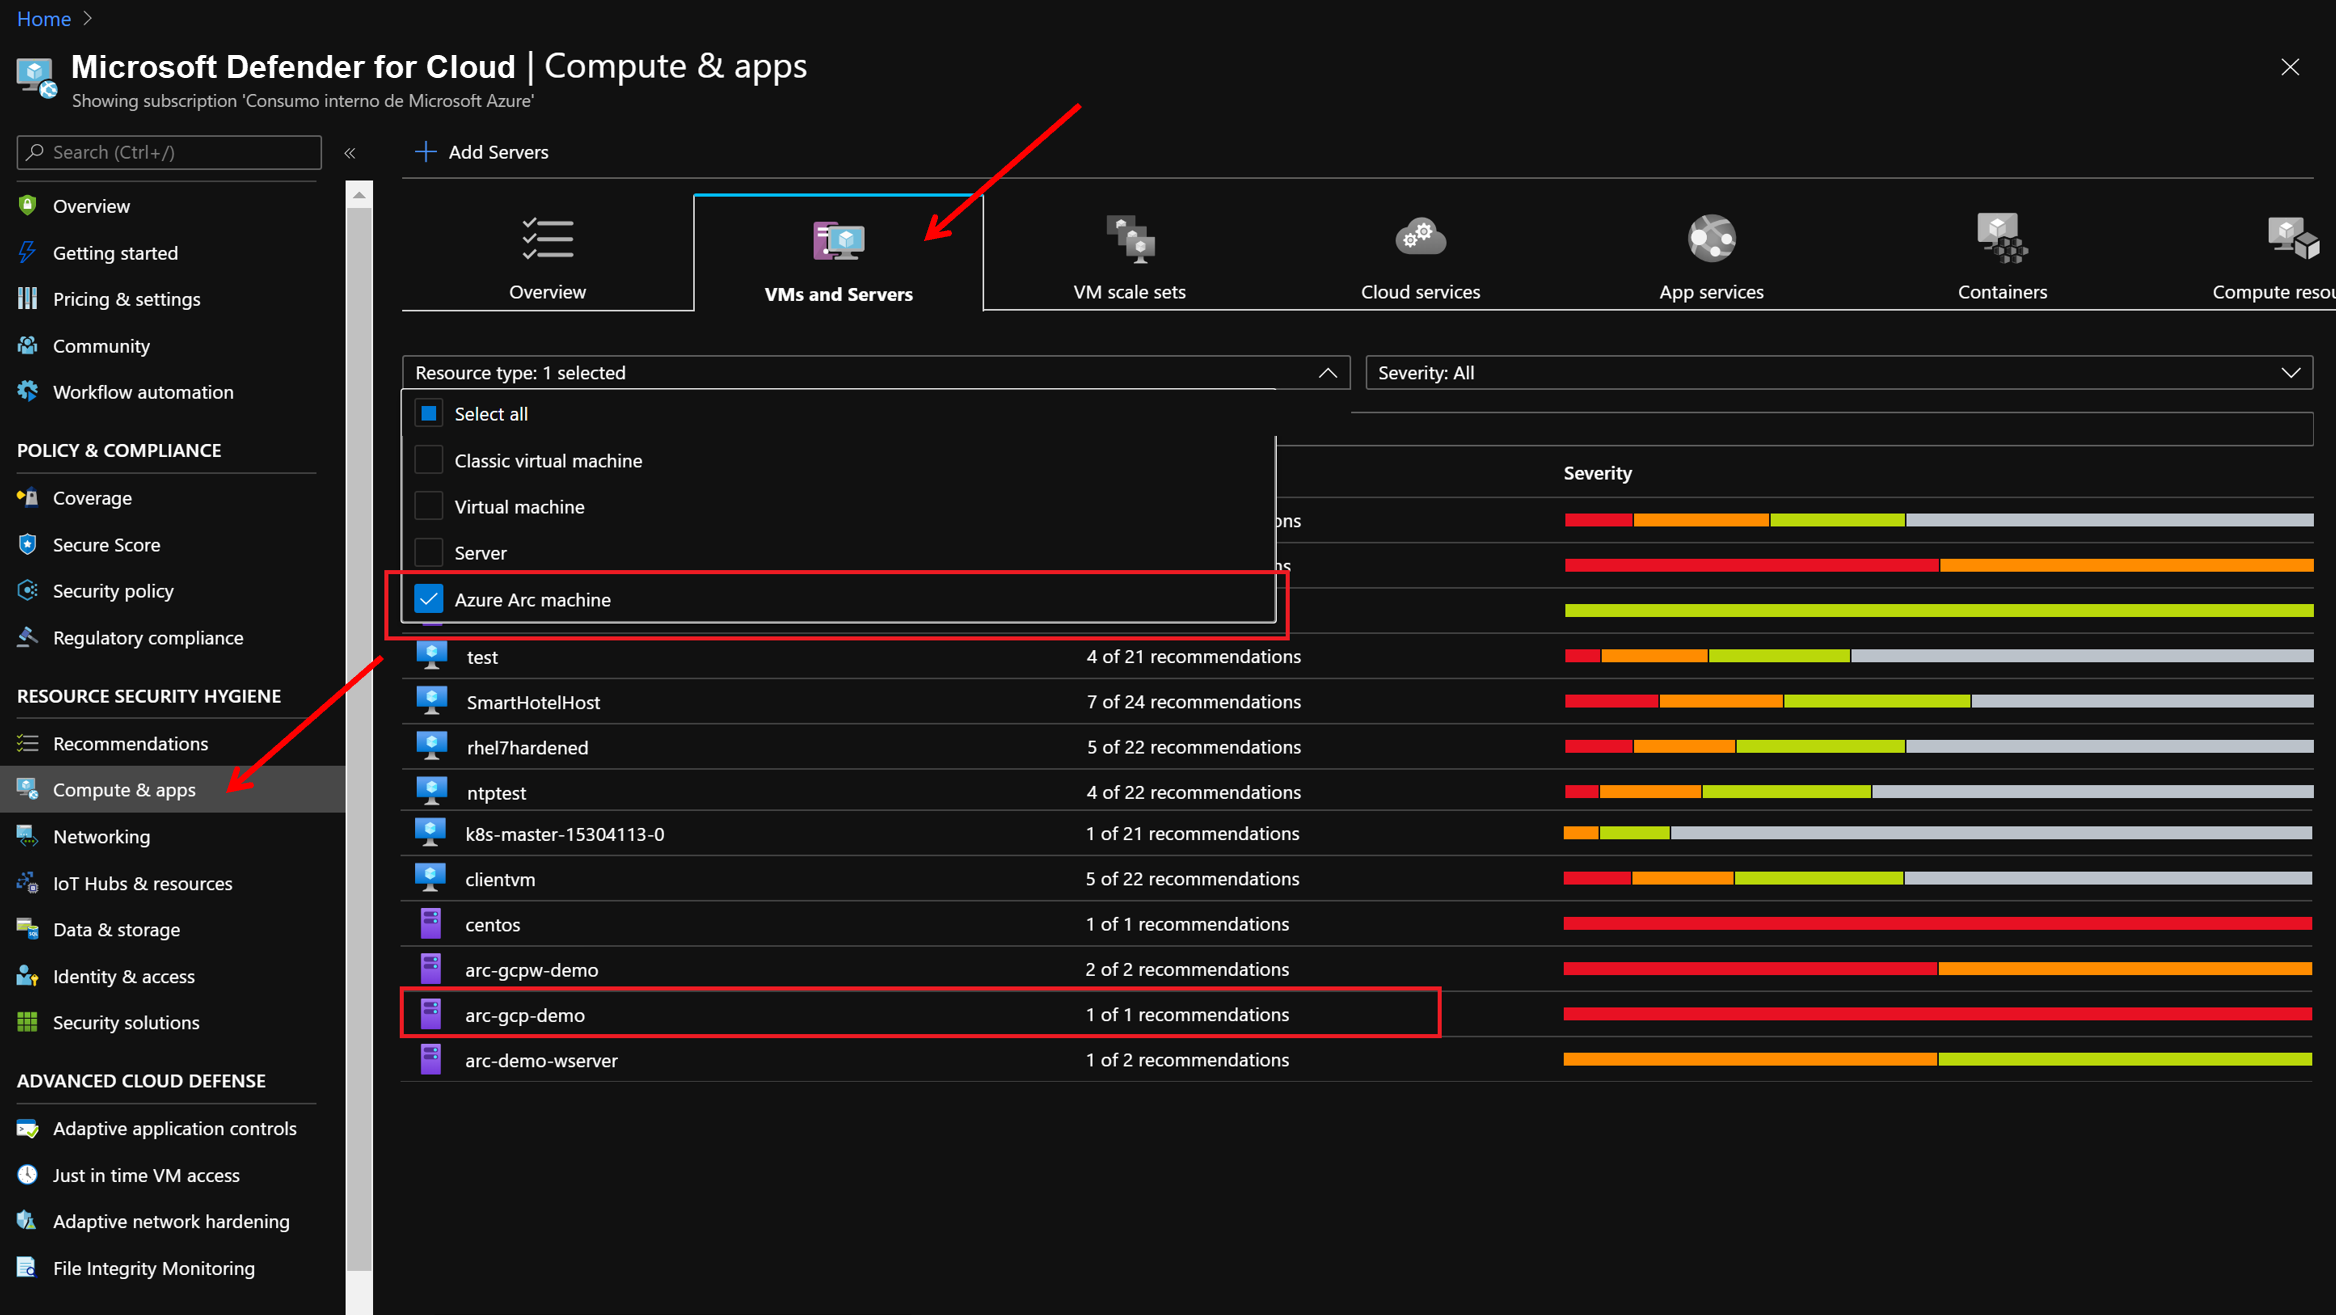 A screenshot of Compute & Apps in Microsoft Defender for Cloud.